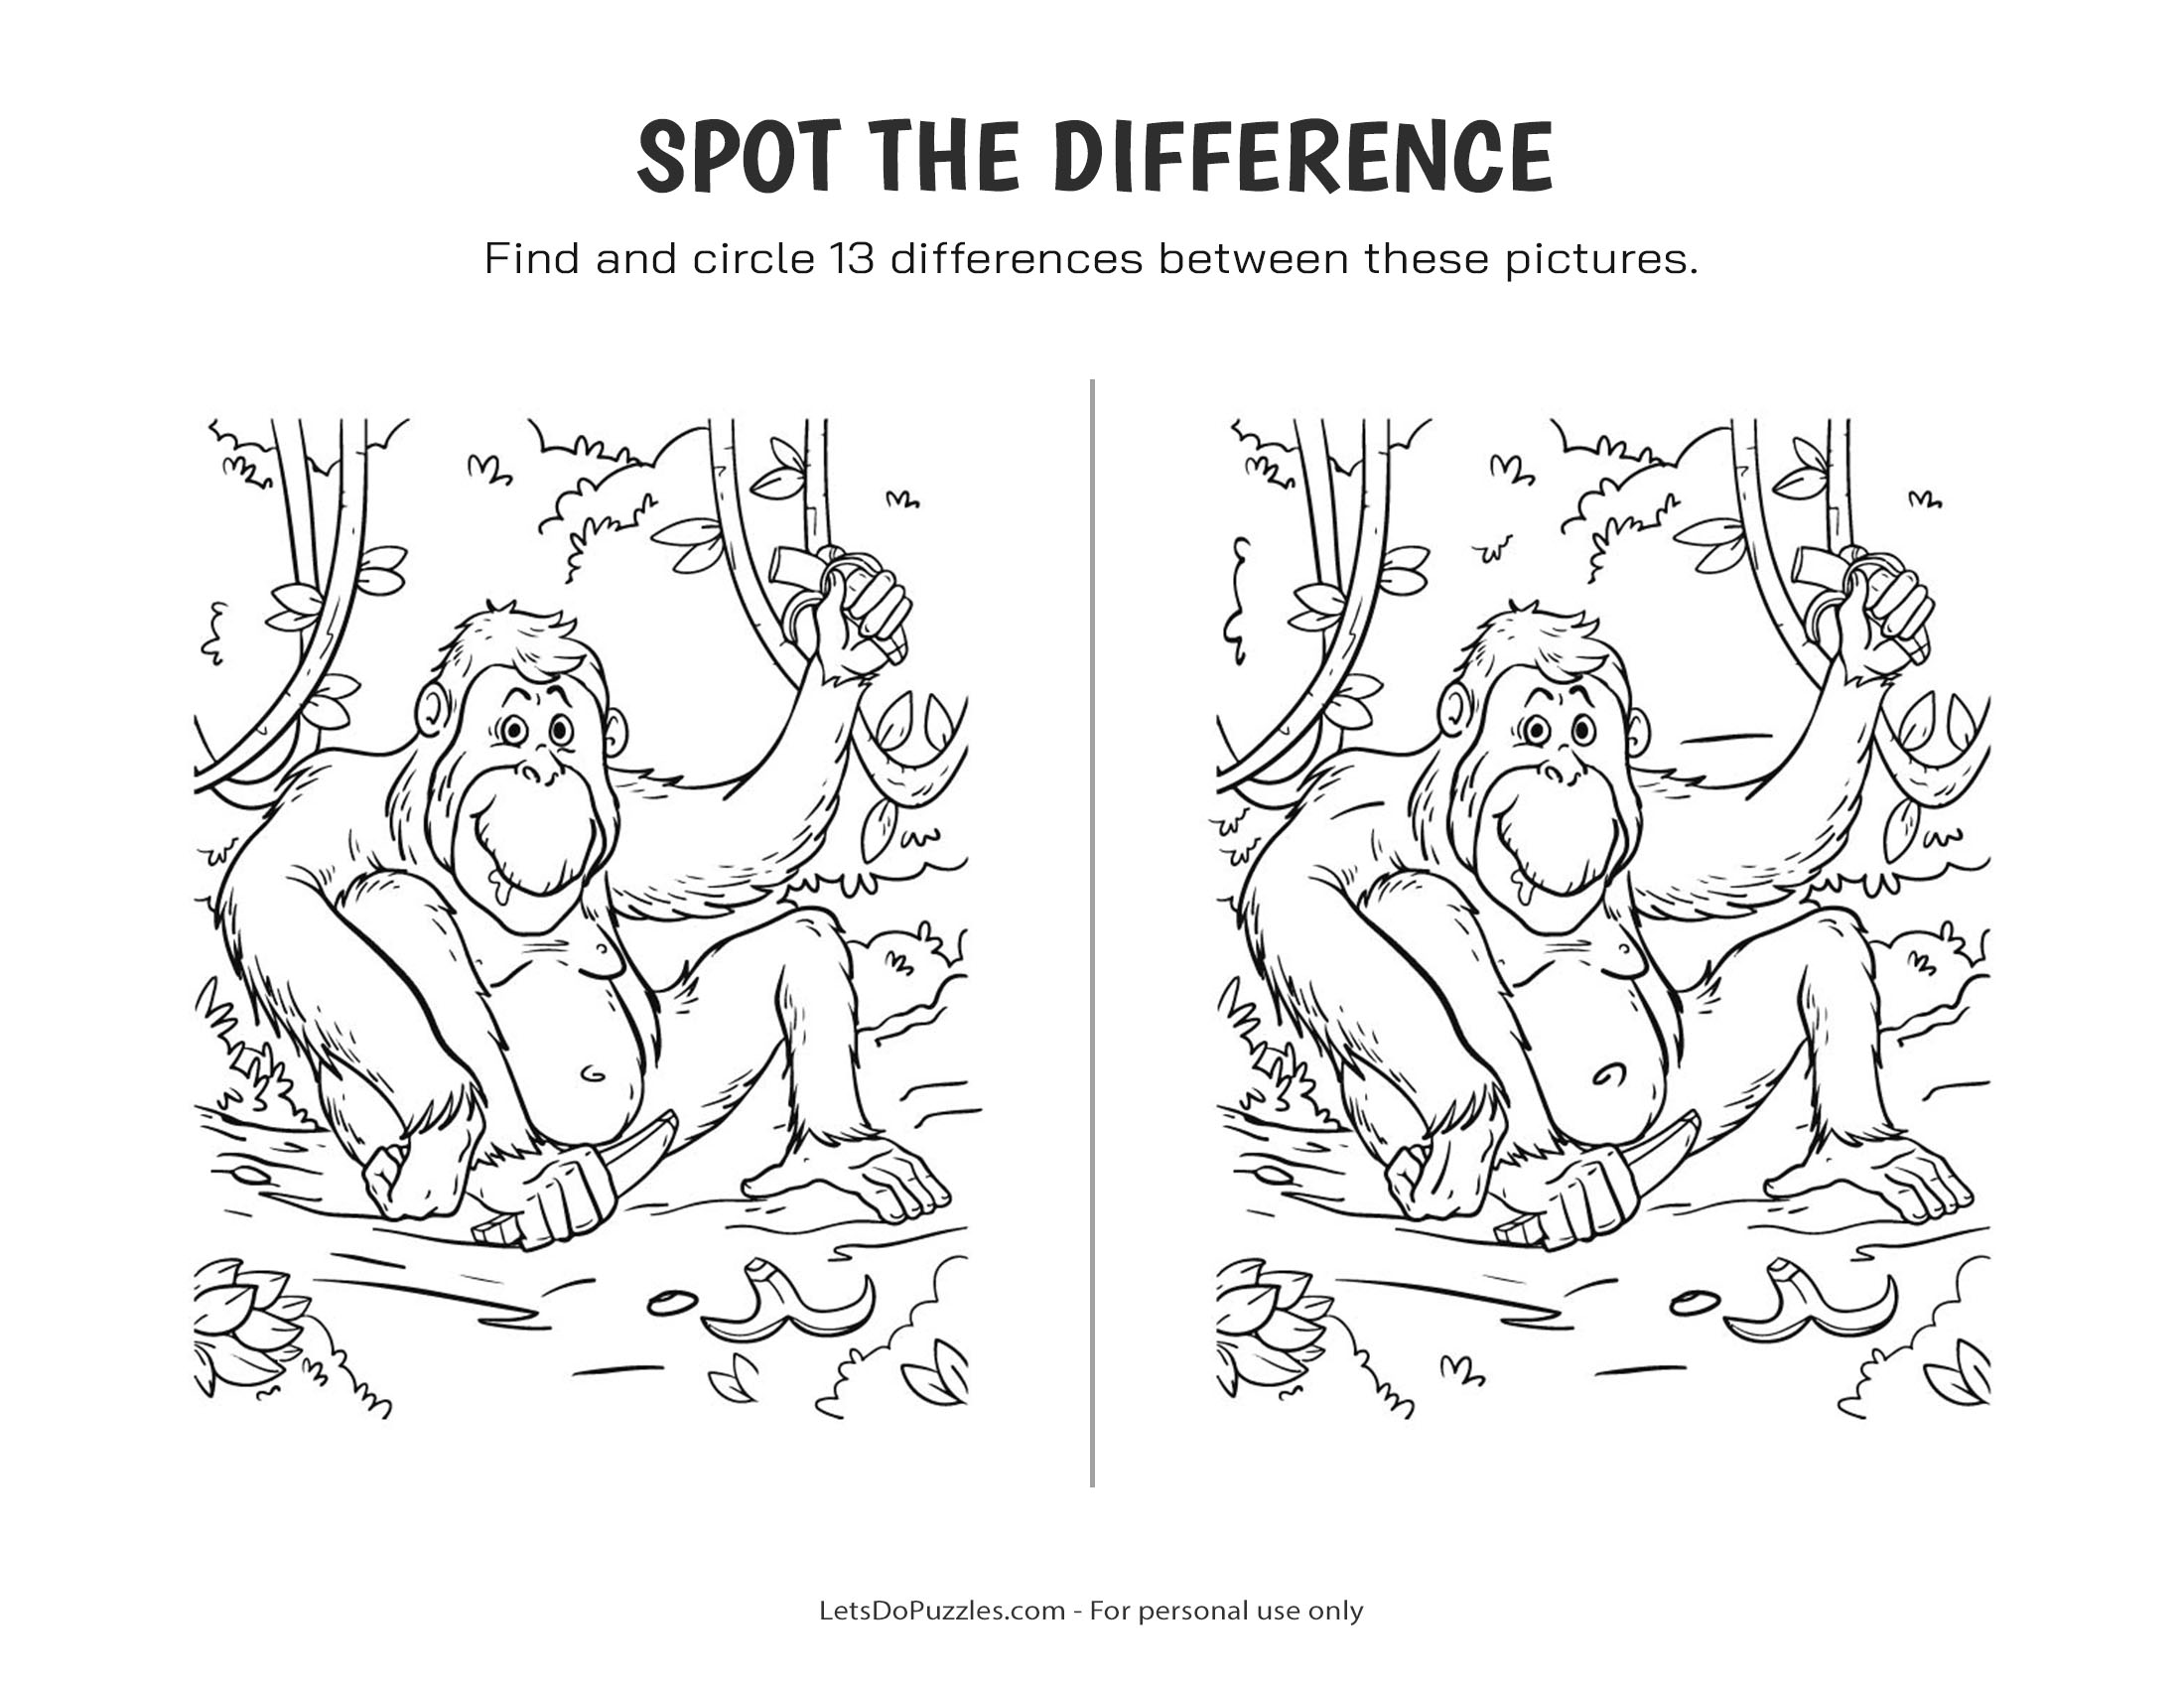 Rainforest Monkey - Spot the Difference